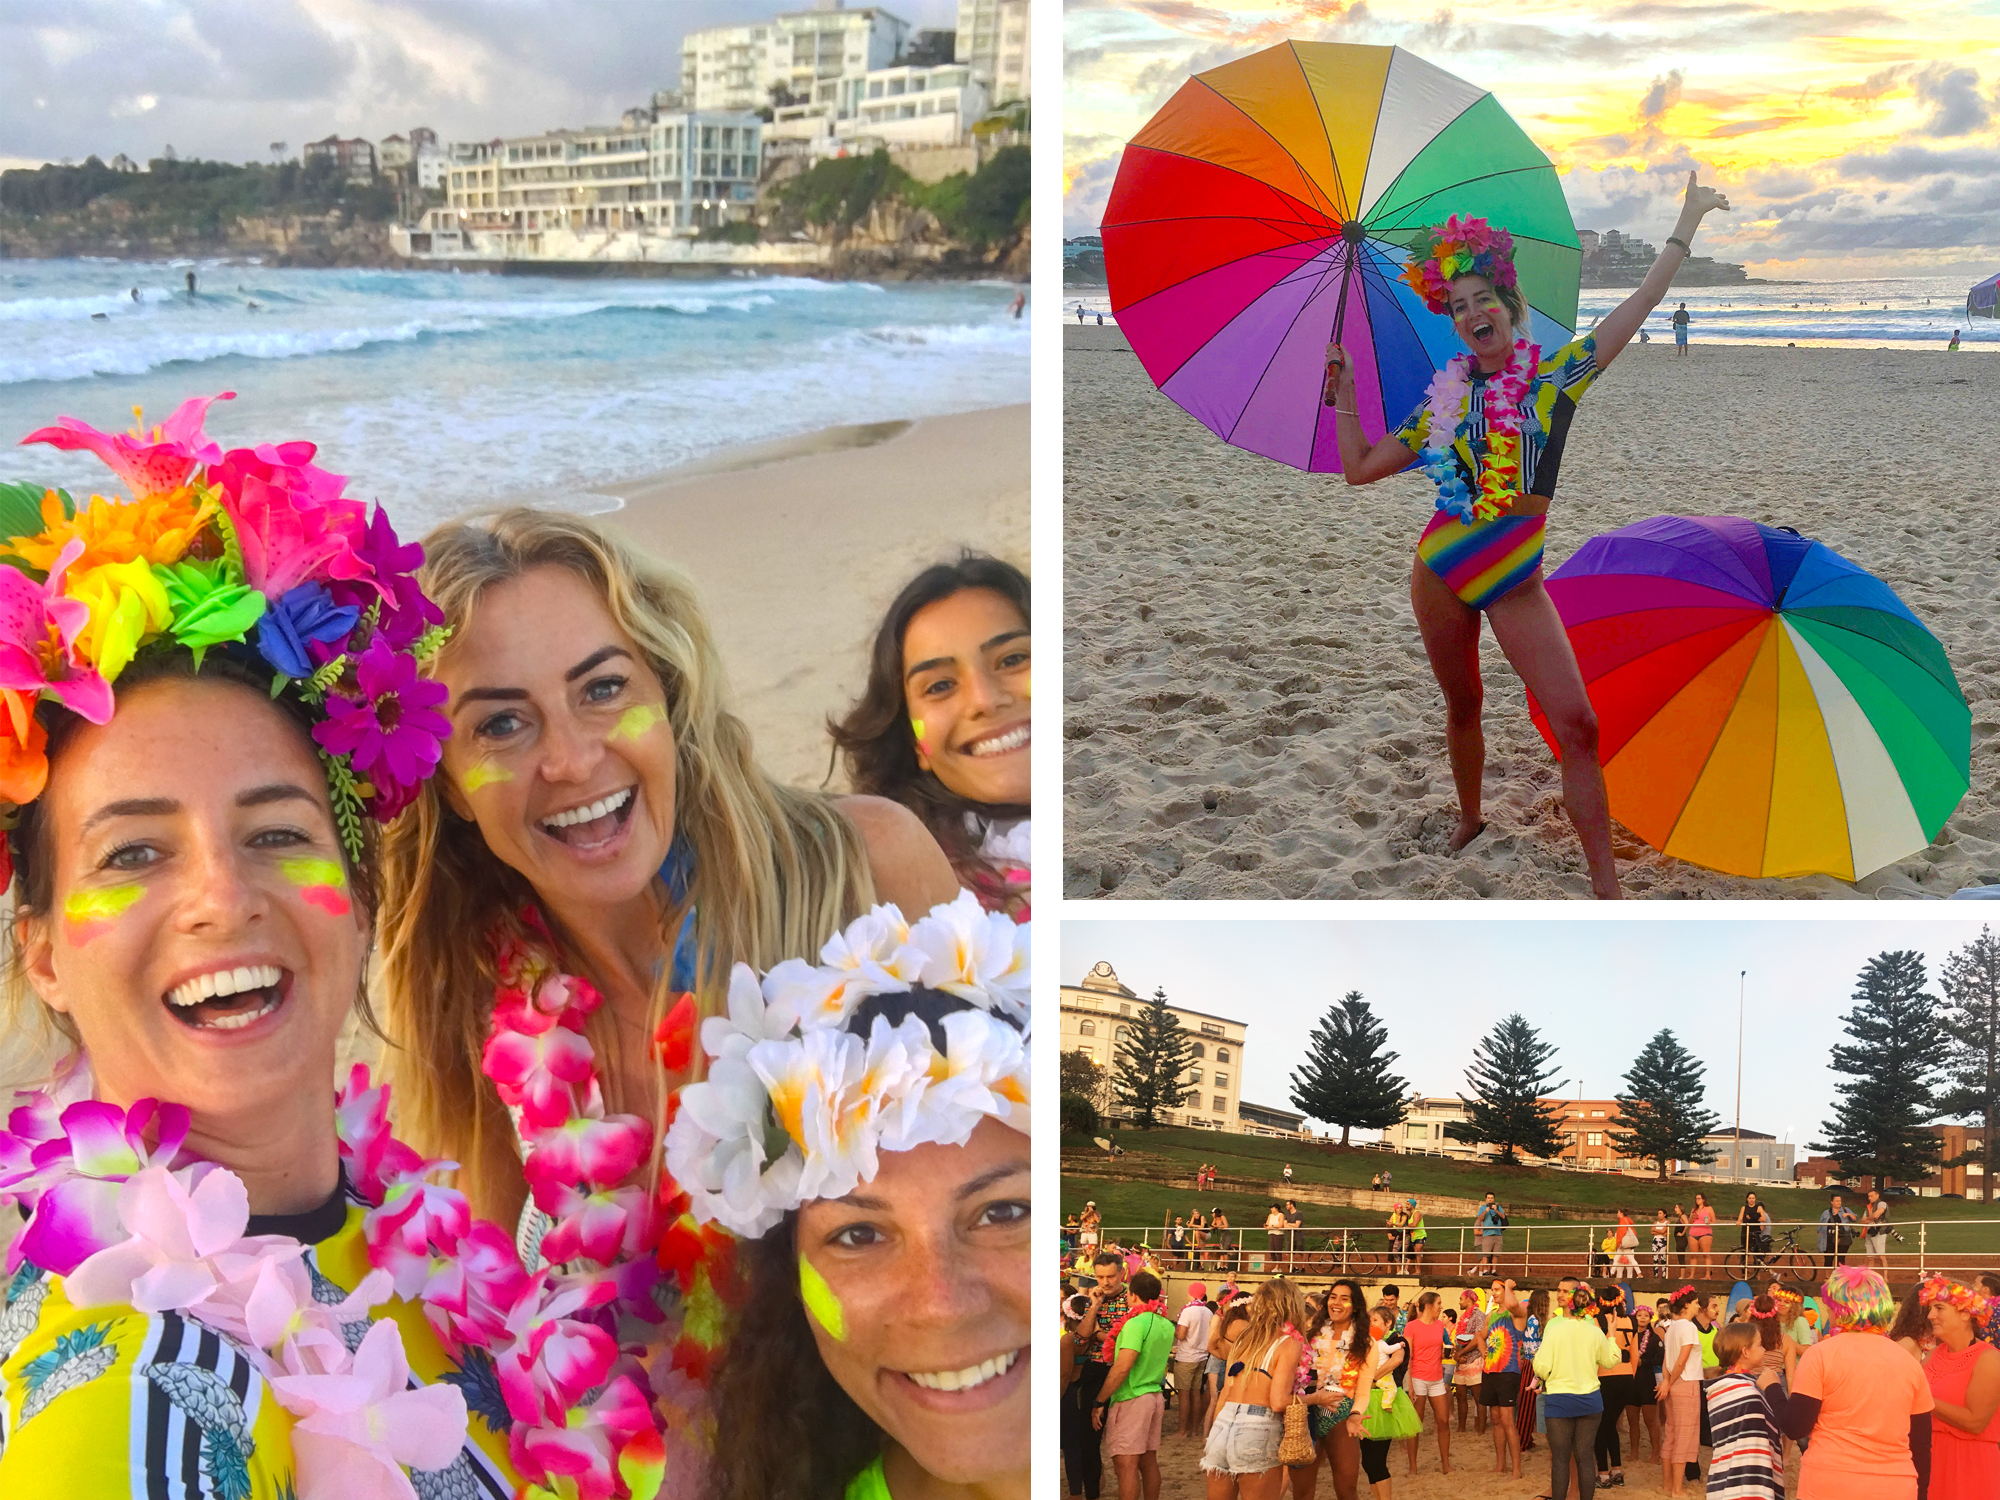 Euphoric Threads heads to Fluro Friday - One Wave is all it takes for Mental Health - Bondi Beach, Sydney